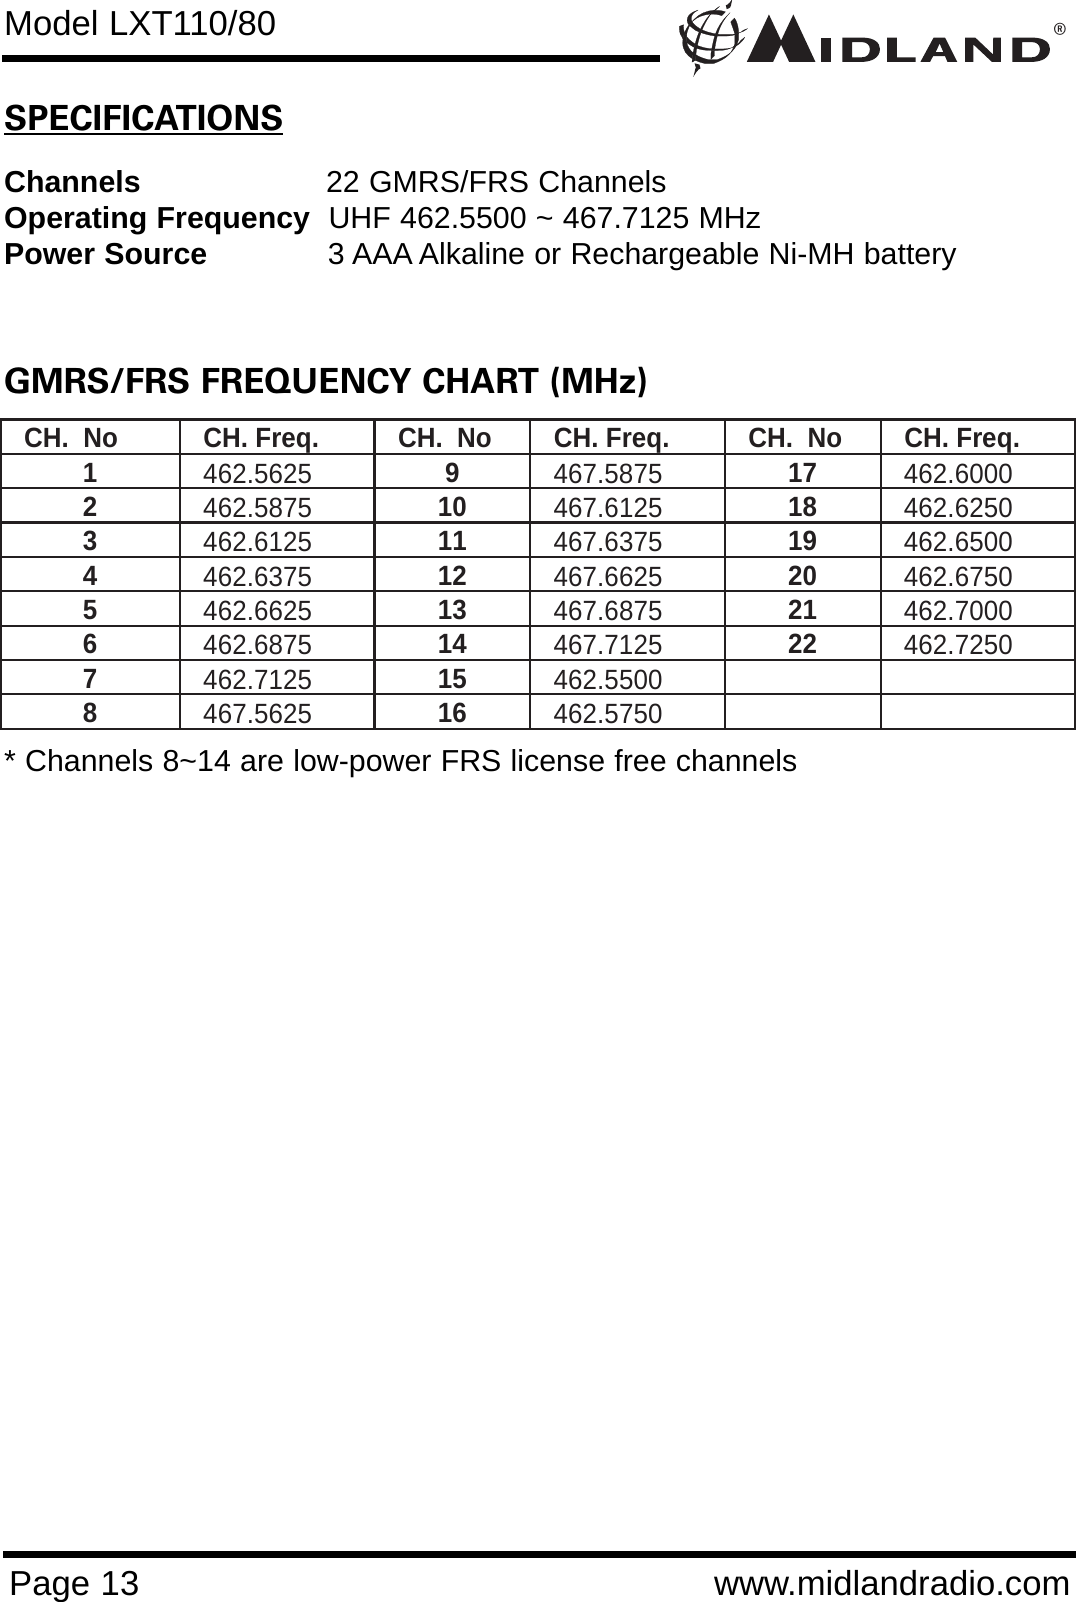 ®Page 13 www.midlandradio.comSPECIFICATIONSChannels 22 GMRS/FRS Channels Operating Frequency UHF 462.5500 ~ 467.7125 MHzPower Source 3 AAA Alkaline or Rechargeable Ni-MH battery GMRS/FRS FREQUENCY CHART (MHz)CH.  No  CH. Freq.  CH.  No  CH. Freq.  CH.  No  CH. Freq. 1  462.5625 9  467.5875 17  462.6000 2  462.5875 10  467.6125 18  462.6250 3  462.6125 11  467.6375 19  462.6500 4  462.6375 12  467.6625 20  462.6750 5  462.6625 13  467.6875 21  462.7000 6  462.6875 14  467.7125 22  462.7250 7  462.7125 15  462.5500   8  467.5625 16  462.5750   * Channels 8~14 are low-power FRS license free channelsModel LXT110/80